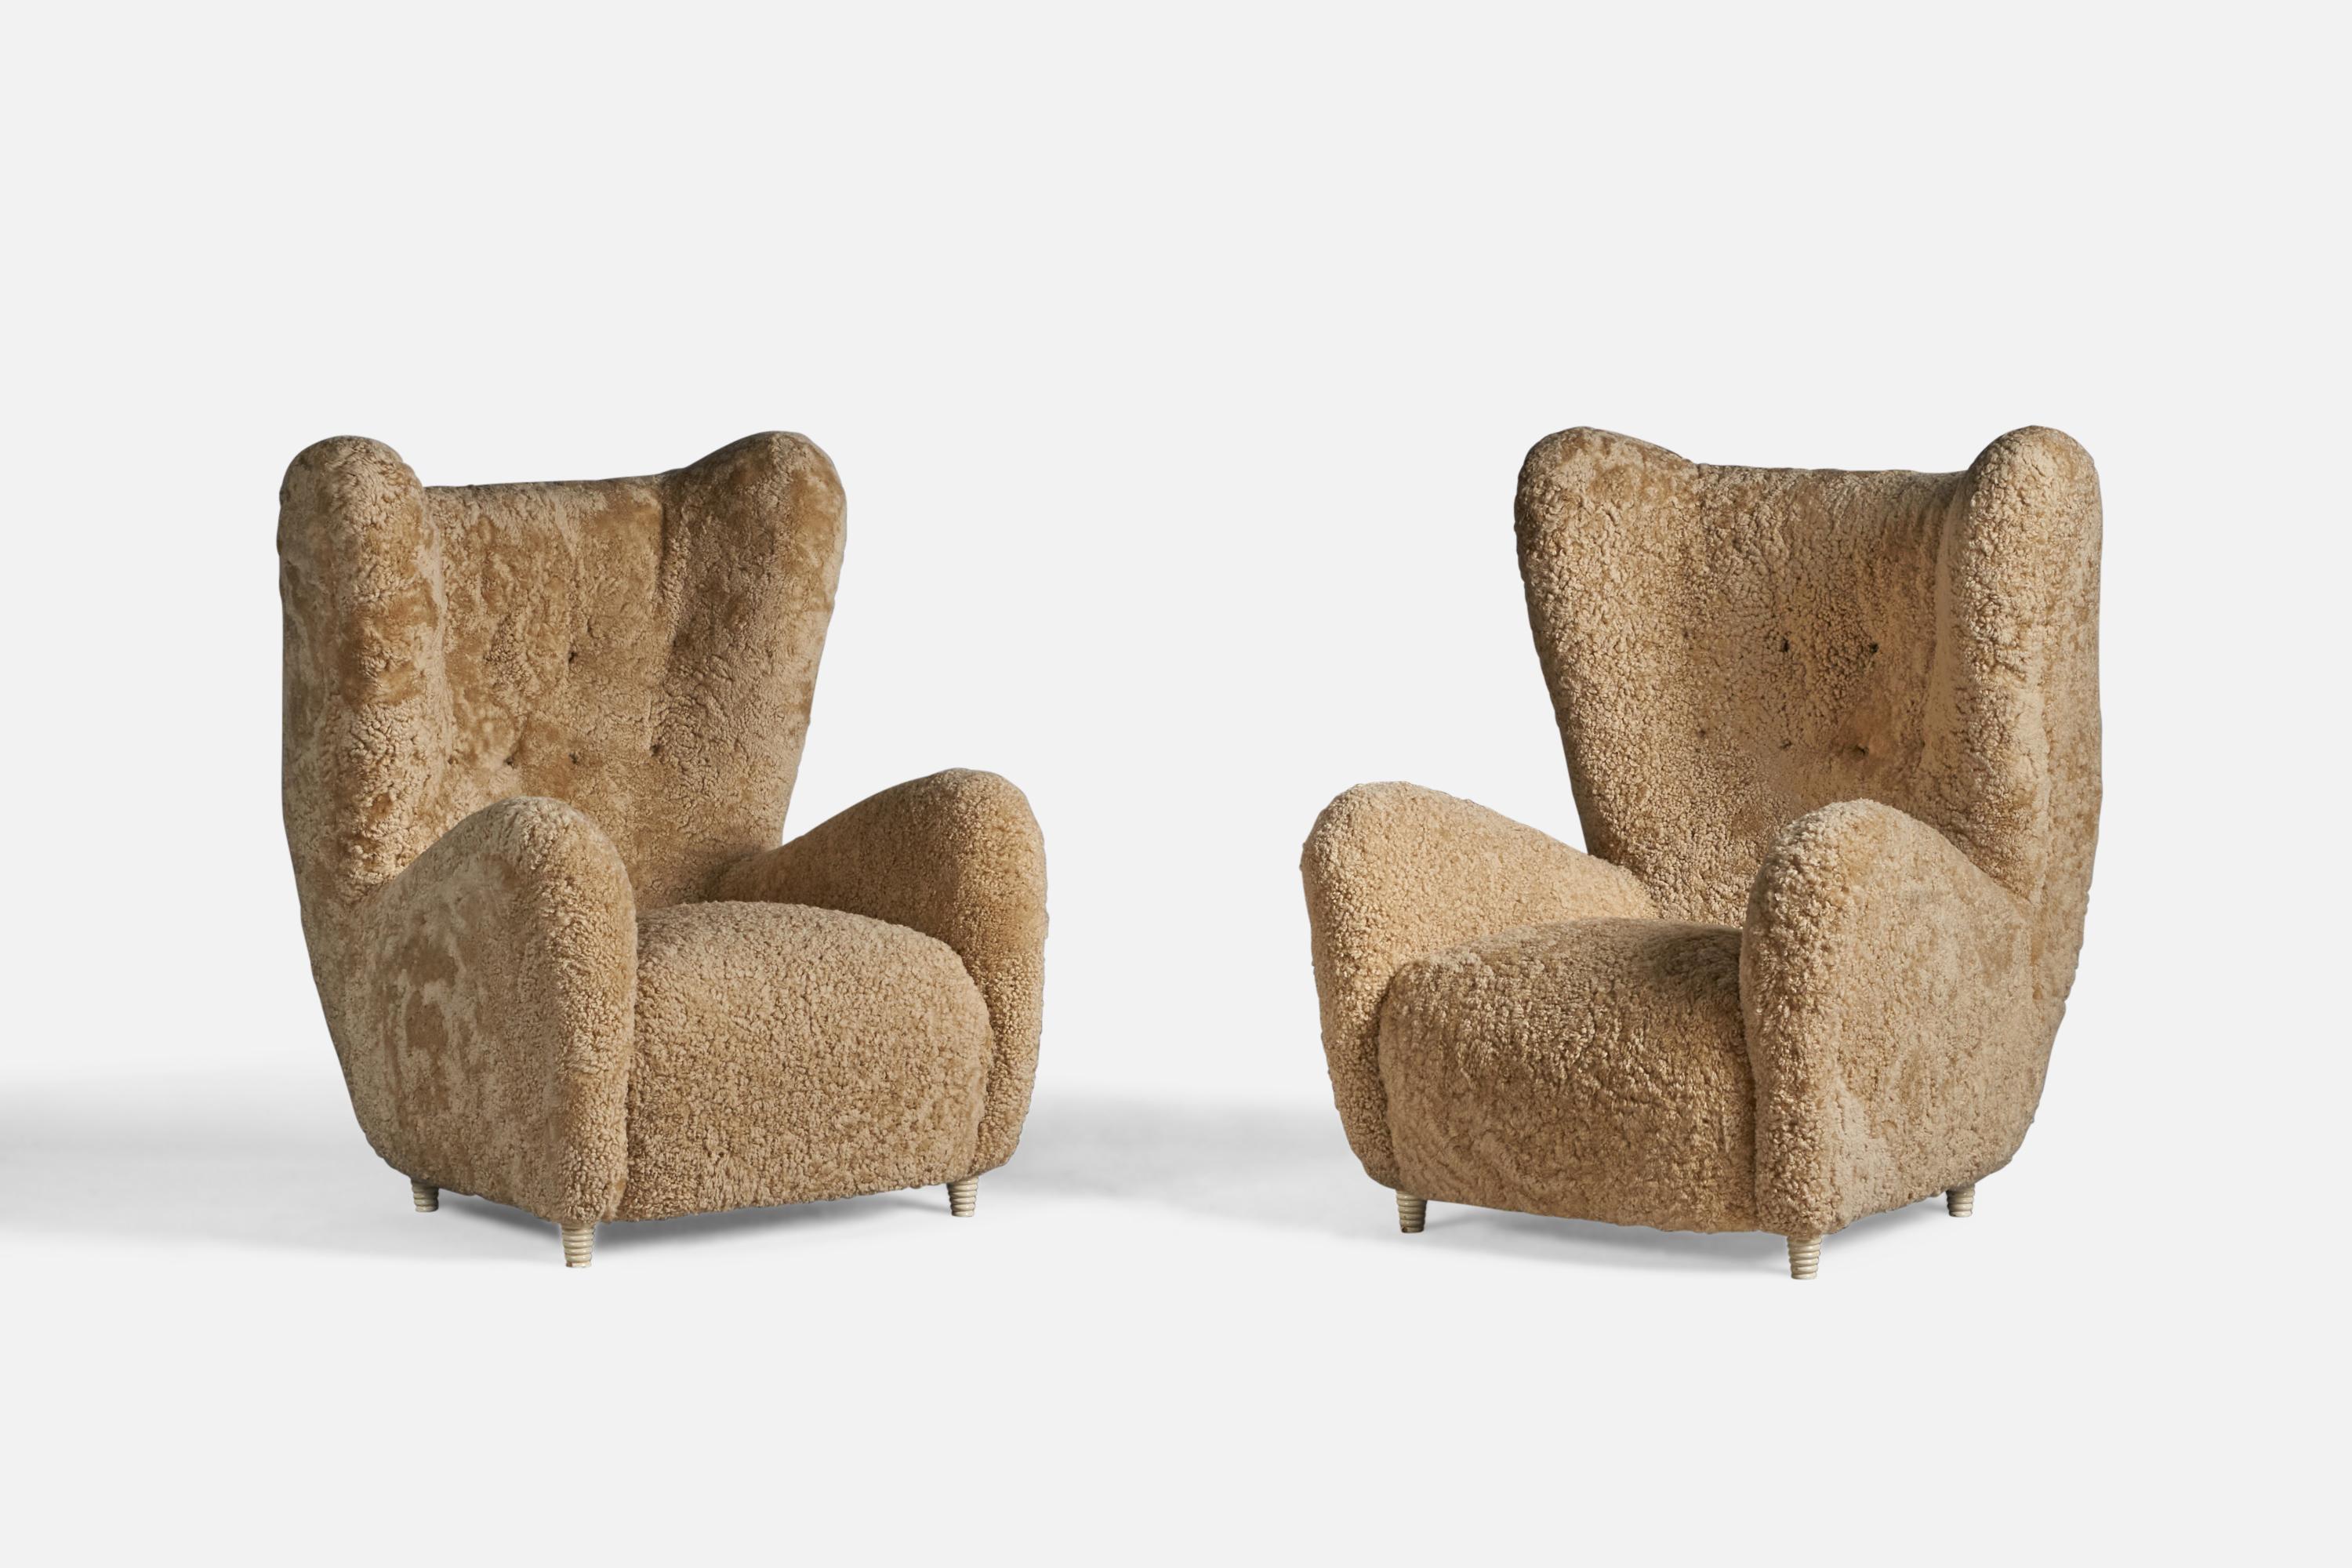 A pair of sizeable organic beige shearling and off-white lacquered wood lounge chairs, designed and produced by Emilio Sarrachi, Milan, Italy, c. 1940s. 

With makers paper label to wooden frame.

19